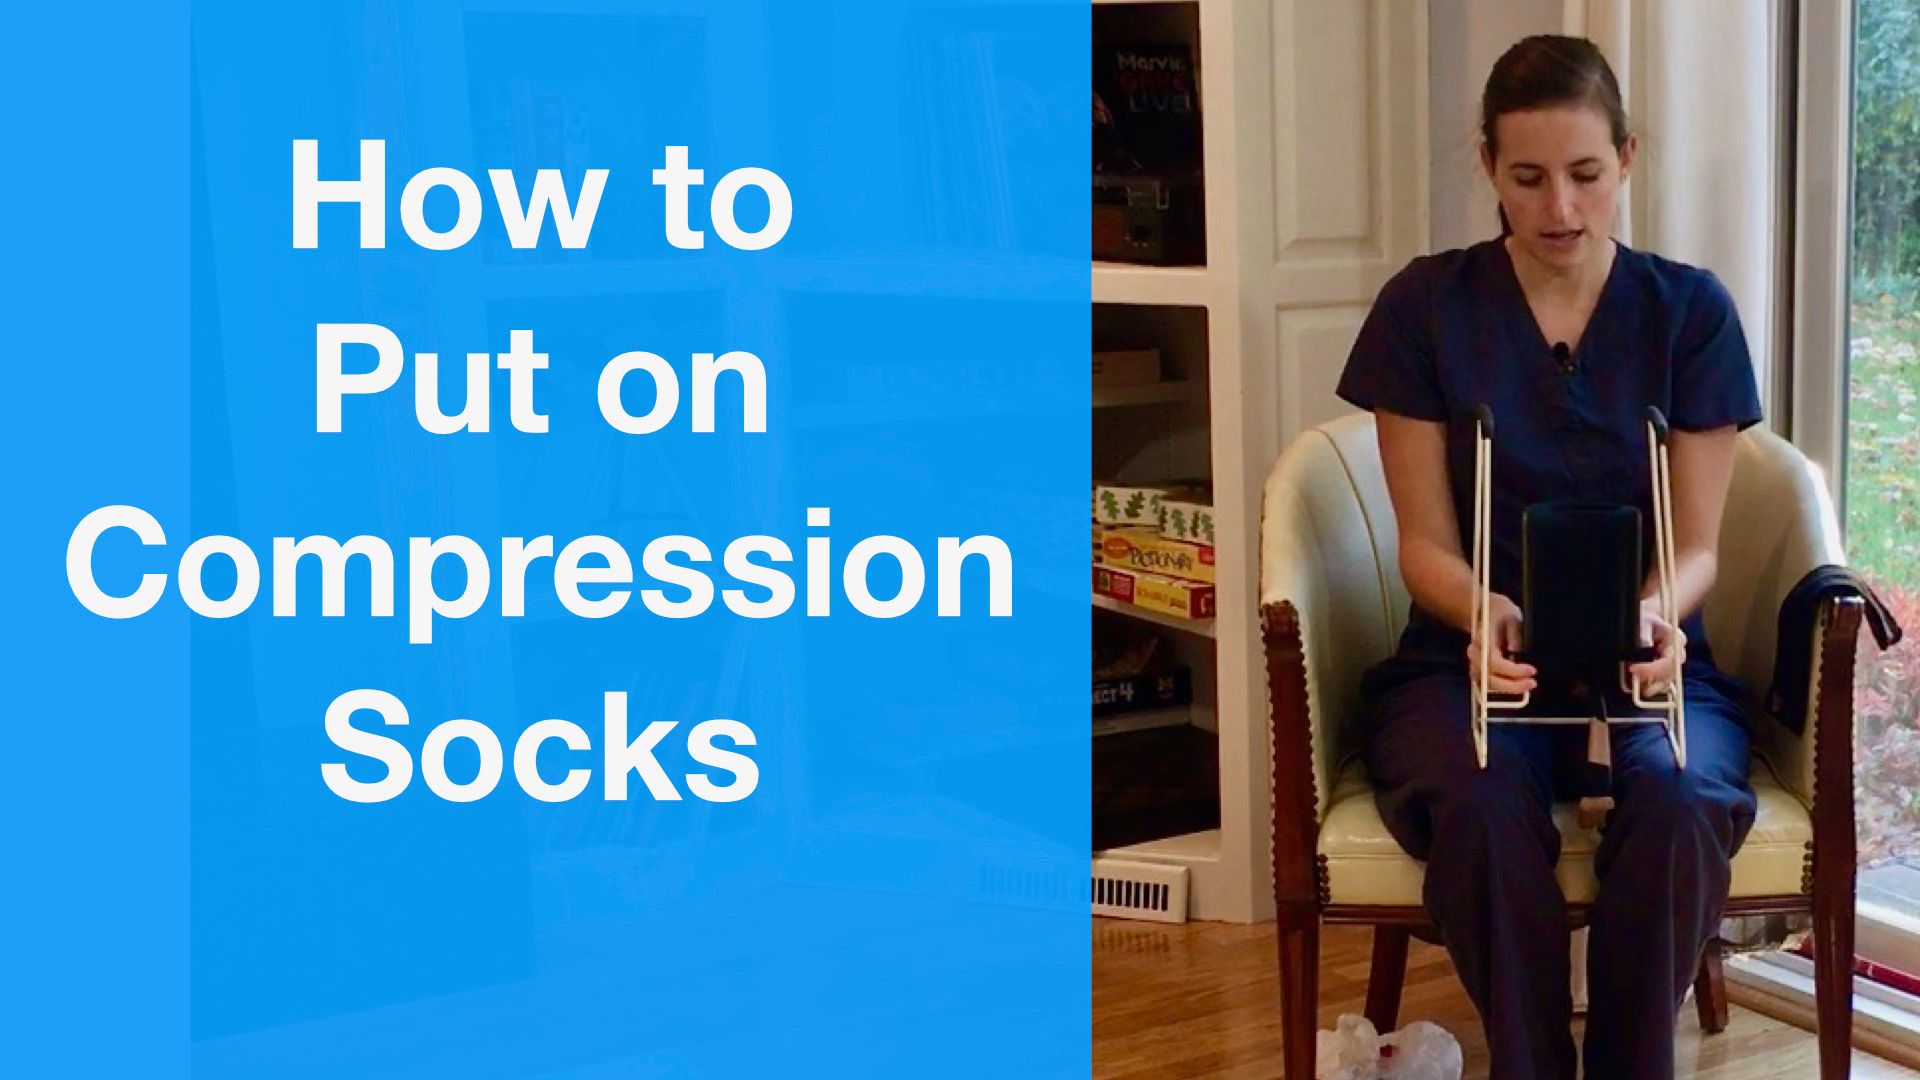 Do you need compression stockings after surgery?